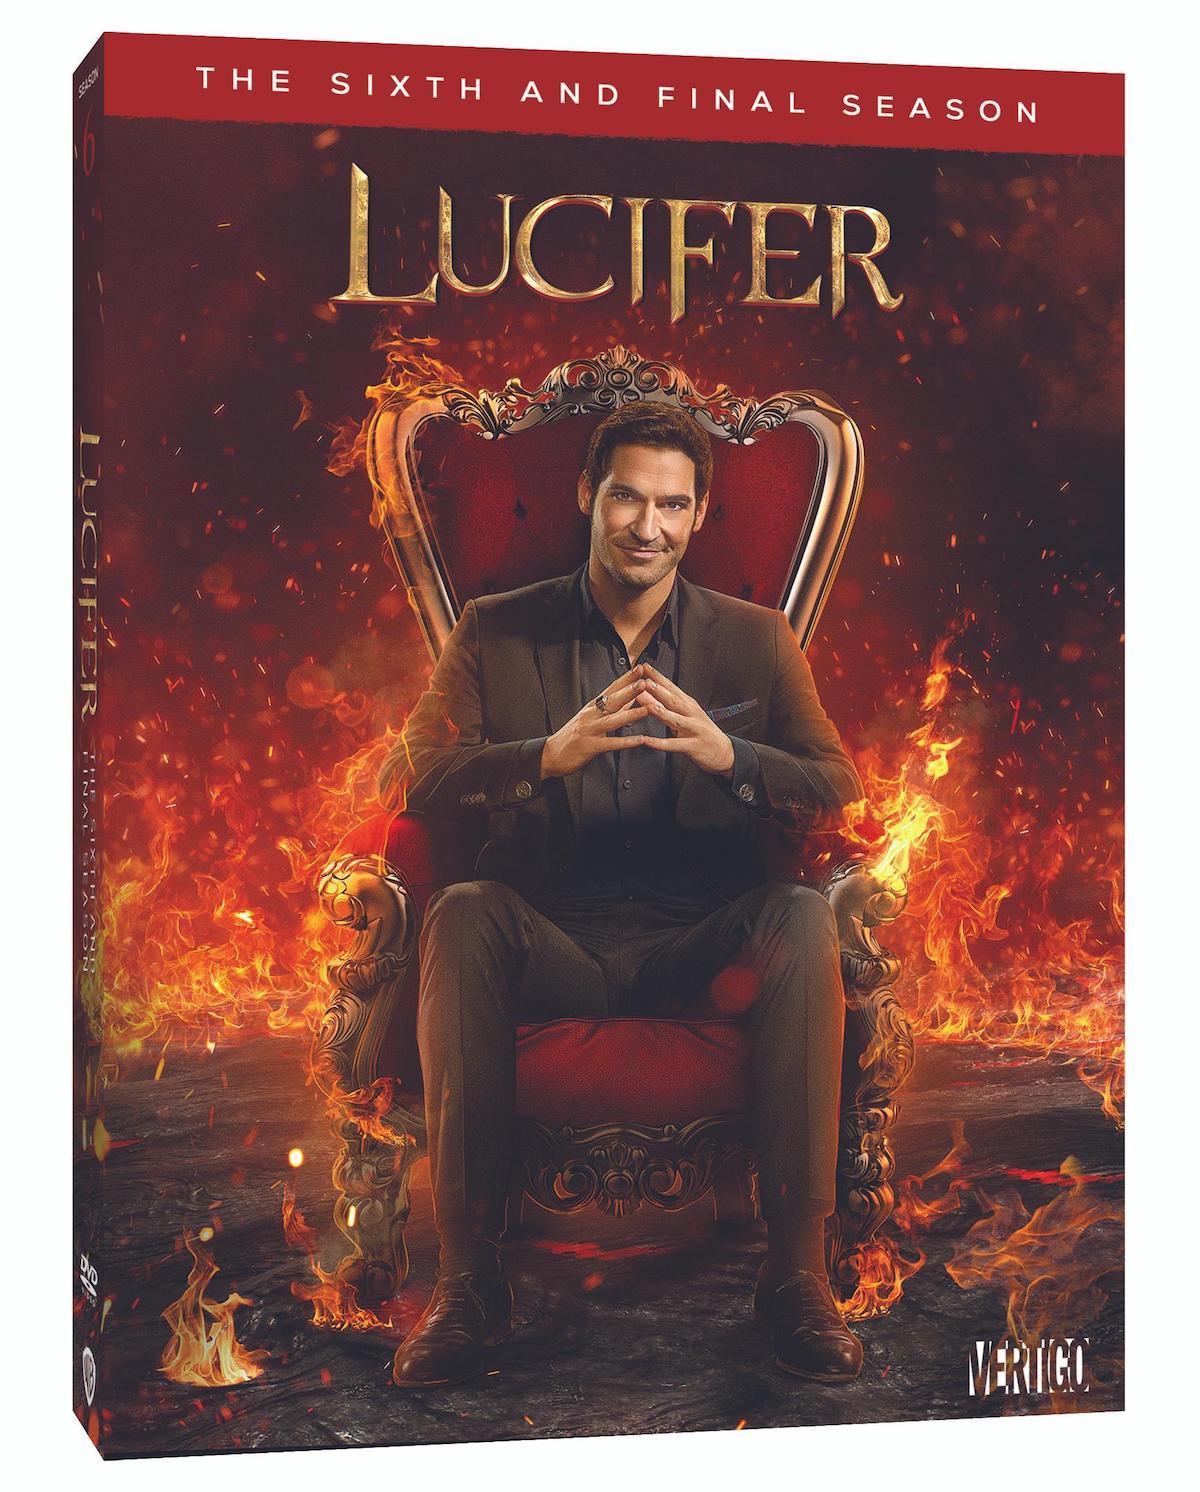 'Lucifer' Fans Will Get a Special Treat One Year After Season 6's Release